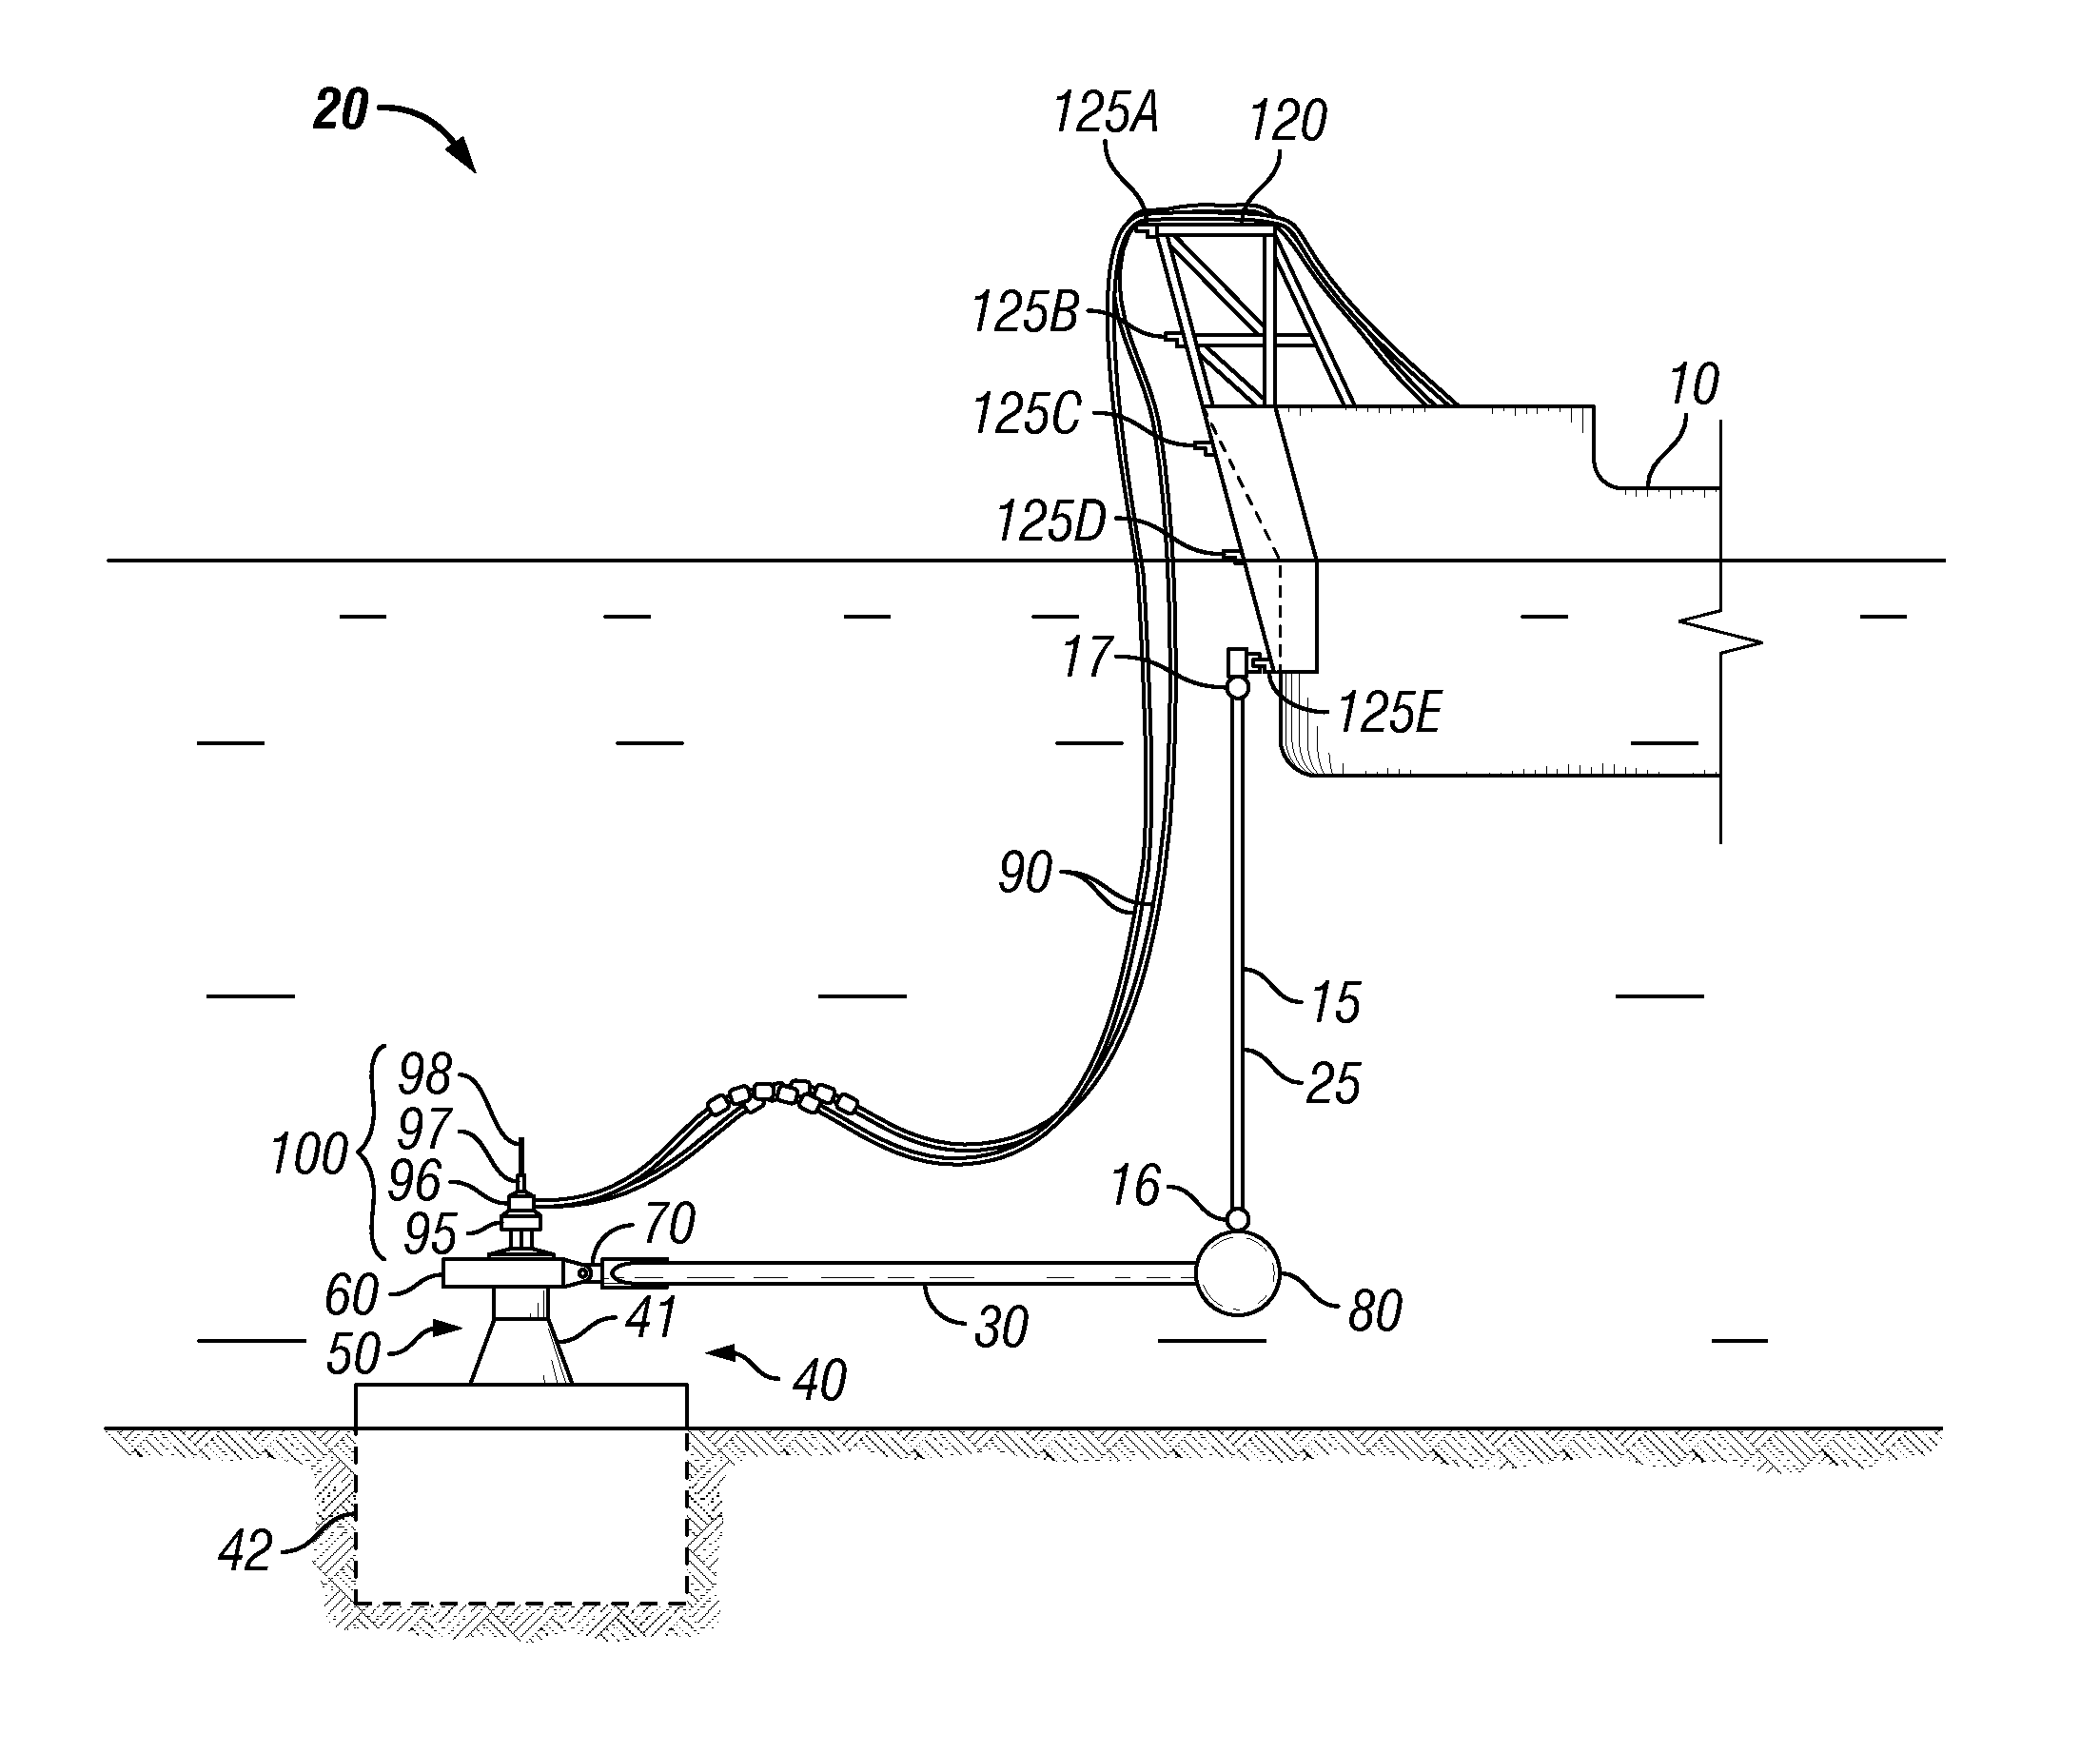 Adjustable and disconnectable submerged-yoke mooring system